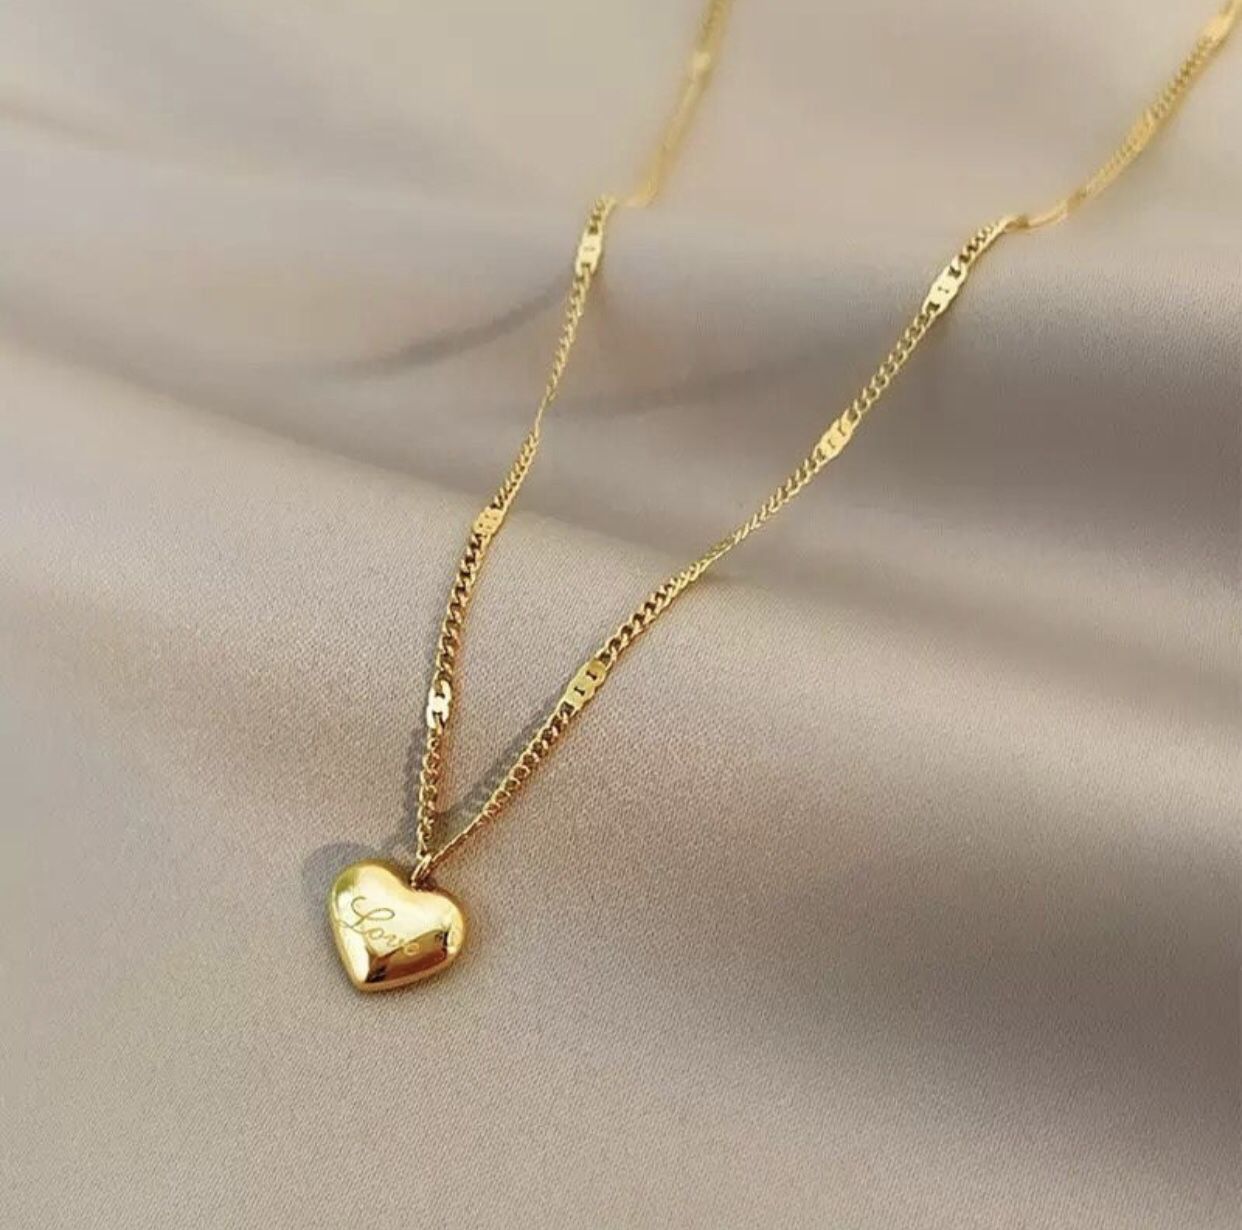 New Classic Stainless Steel Gold Color Love Heart Necklaces 